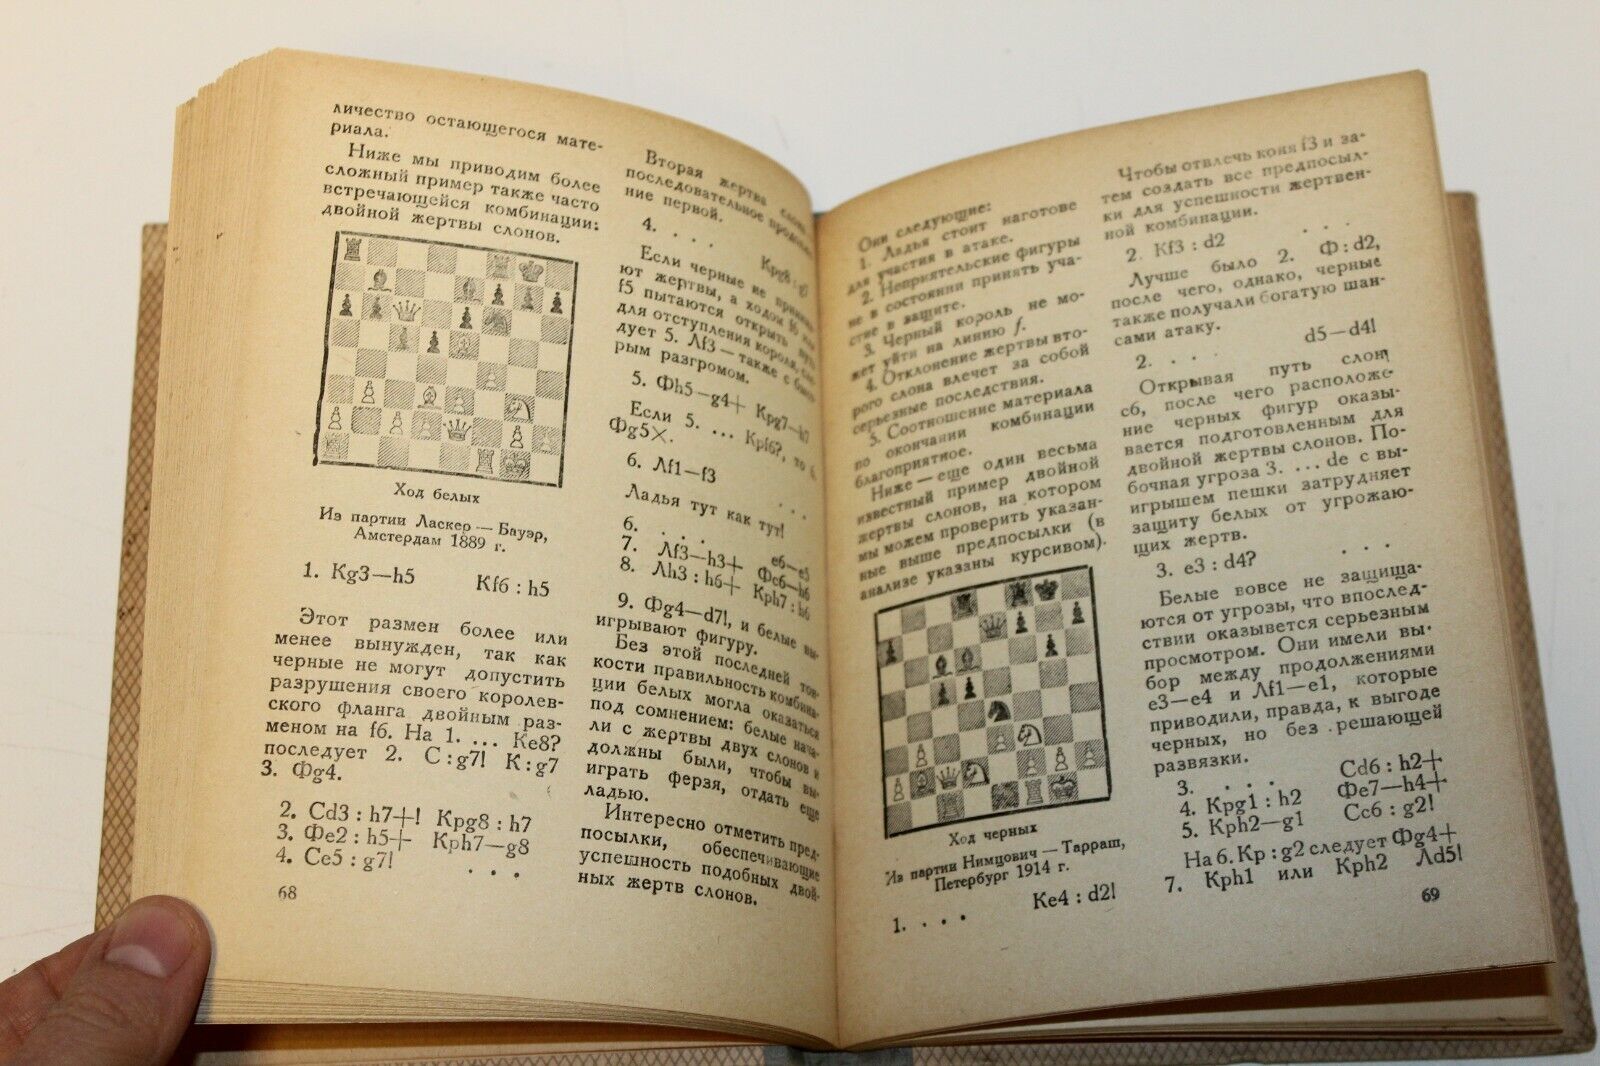 10881.Antique Russian Chess Book: Max Euwe. Strategy and tactics. 1937